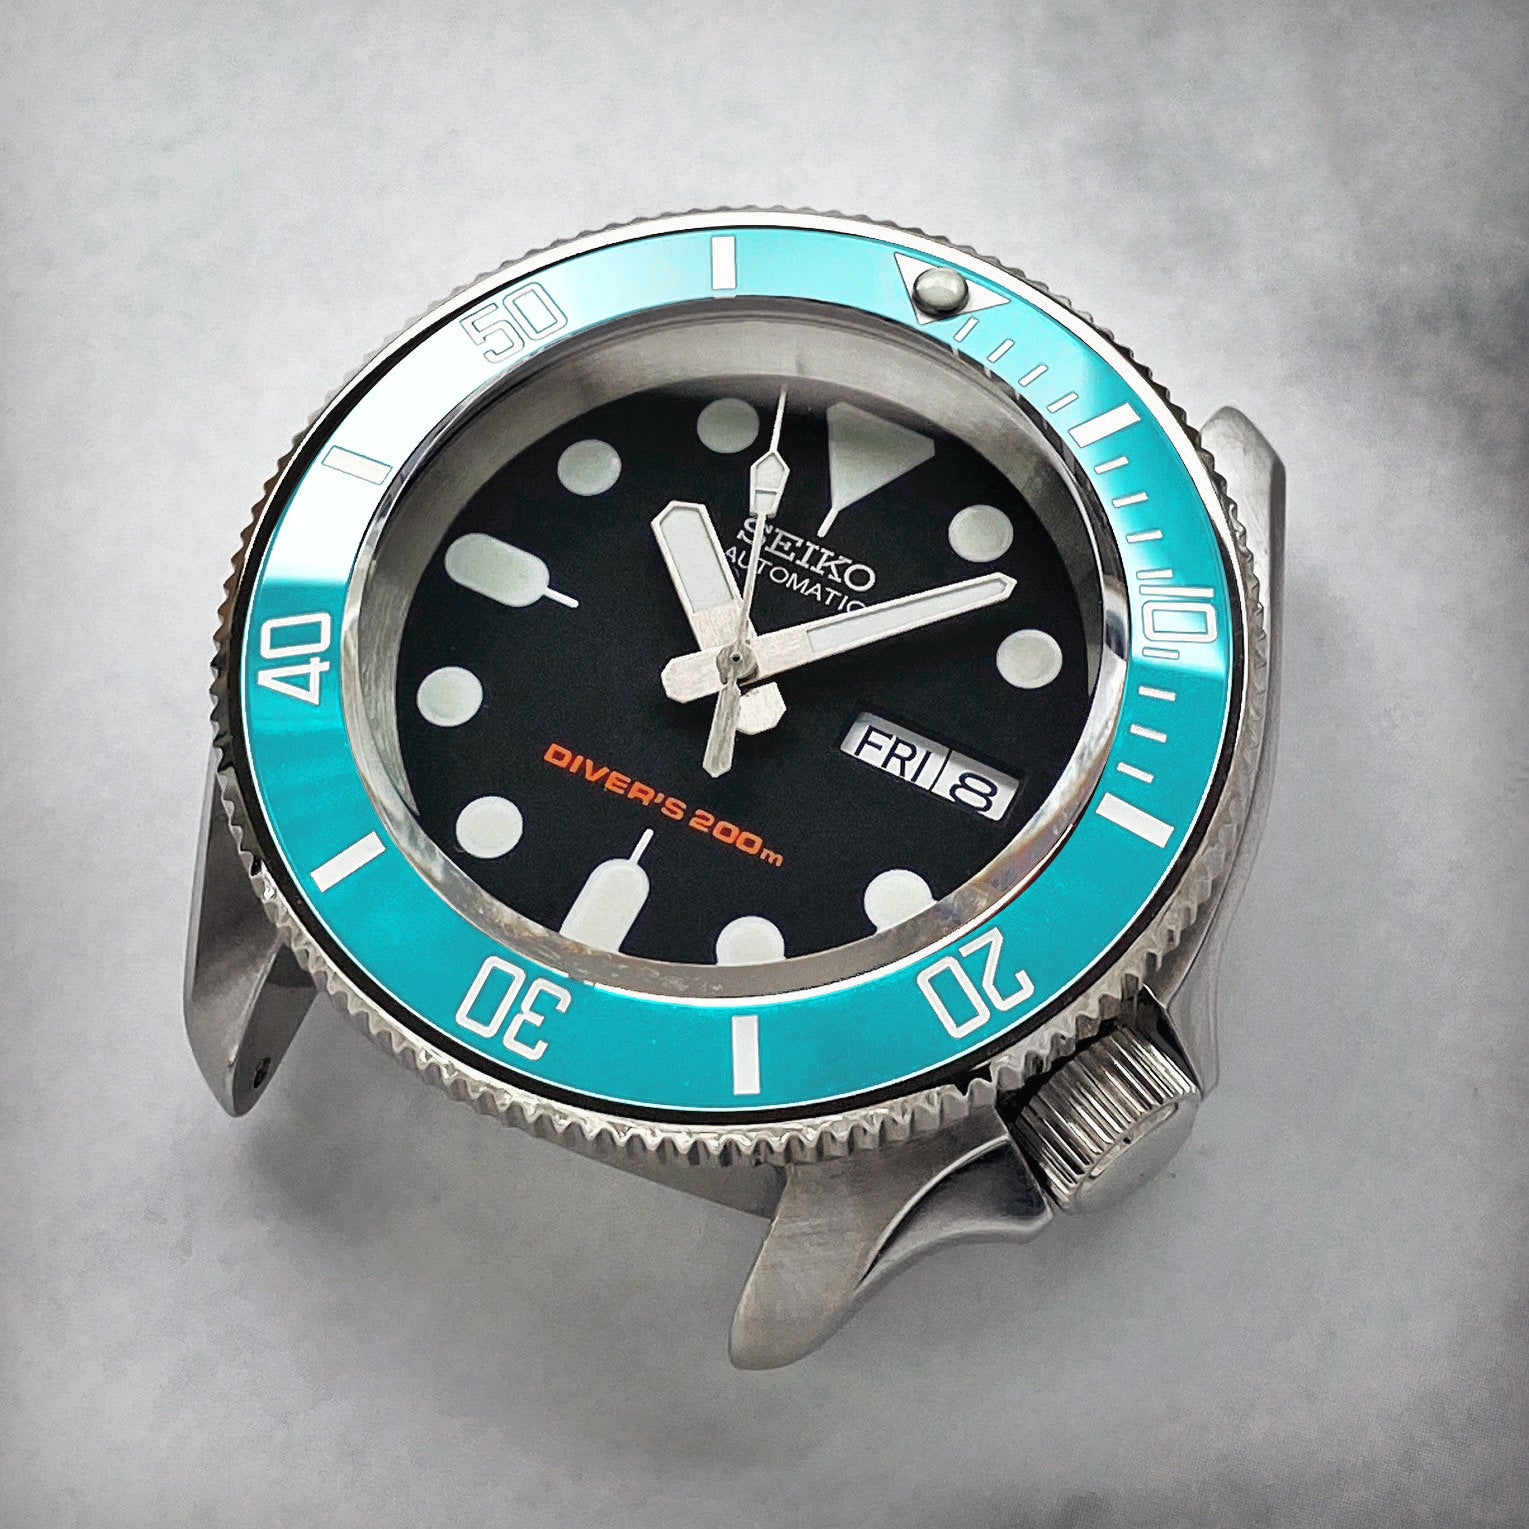 Uafhængighed tub navigation Ceramic Insert - 007 Sub Turquoise - DLW WATCHES